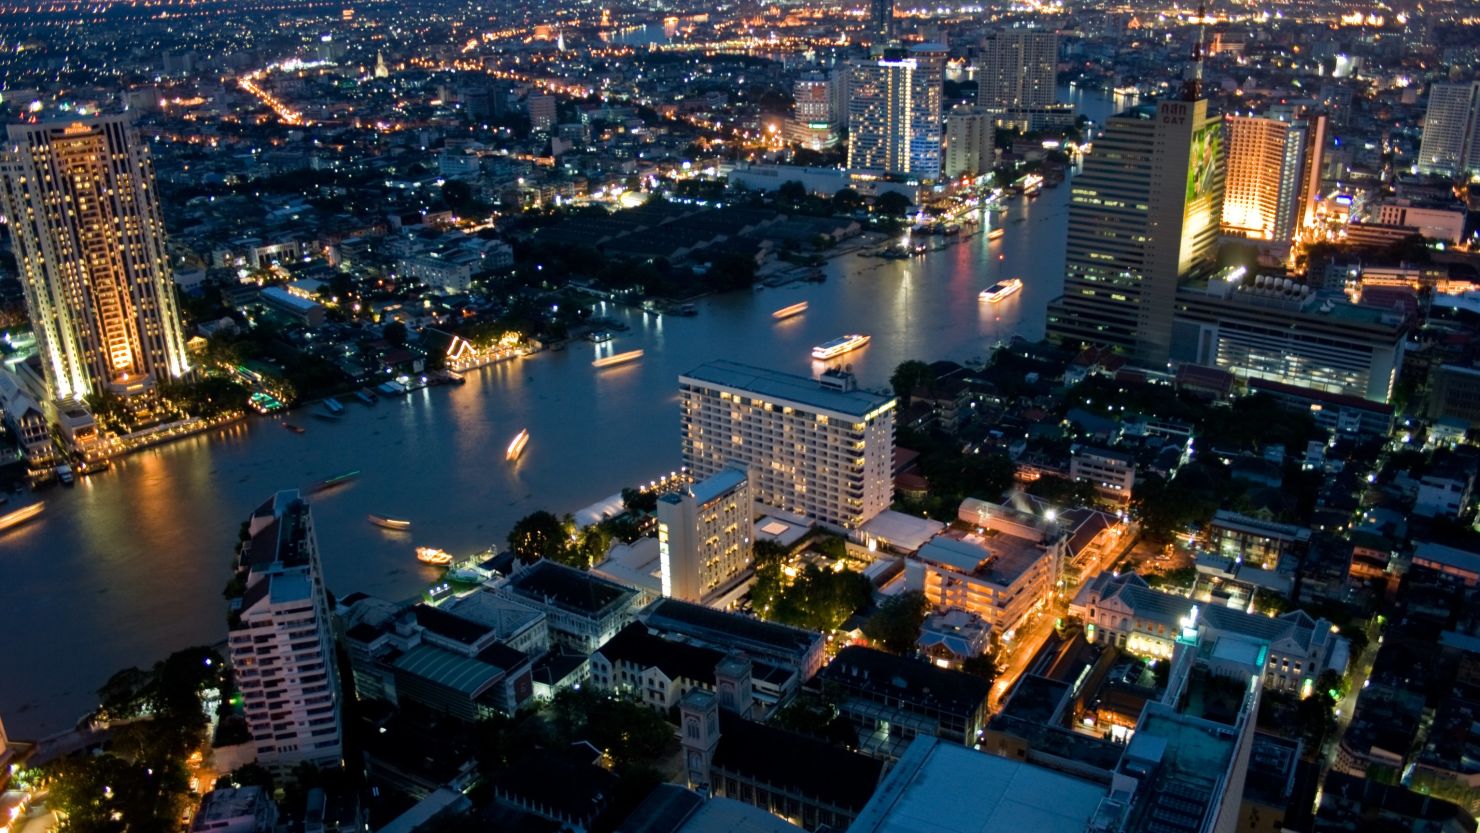 See the luxurious side of Thailand's capital.